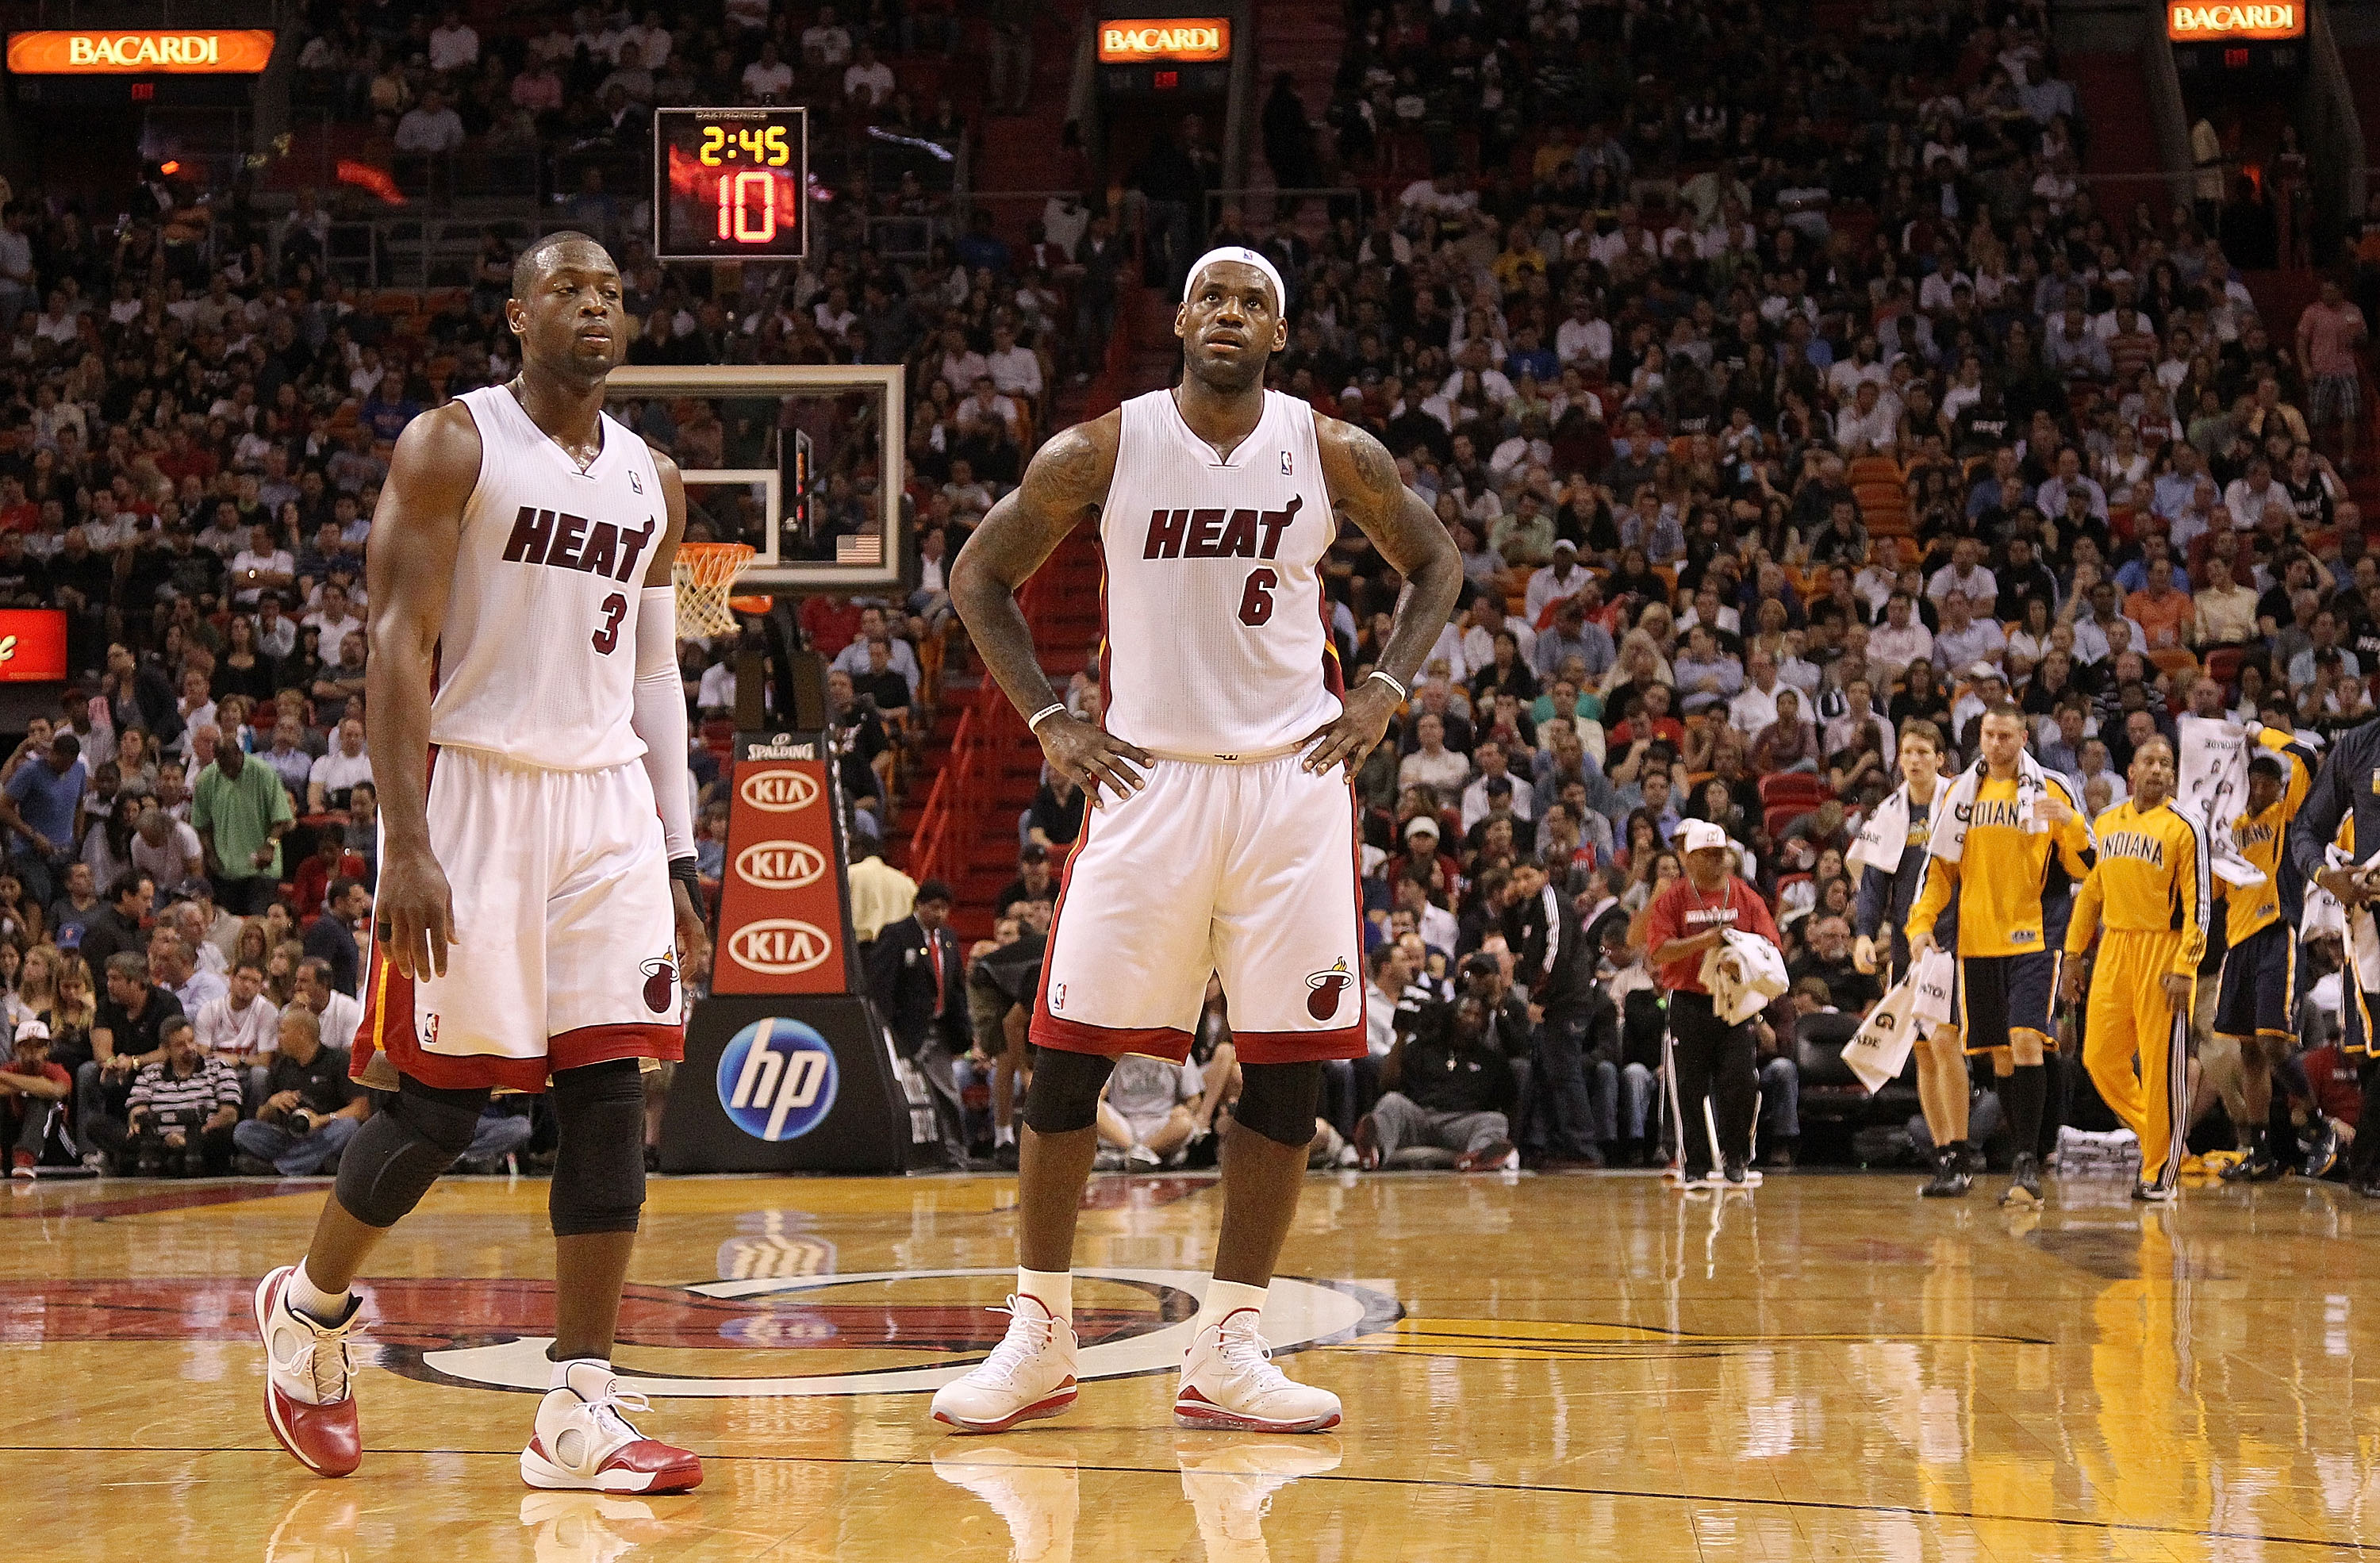 Miami Heat's Dwyane Wade (3) goes for the basket as New Orleans